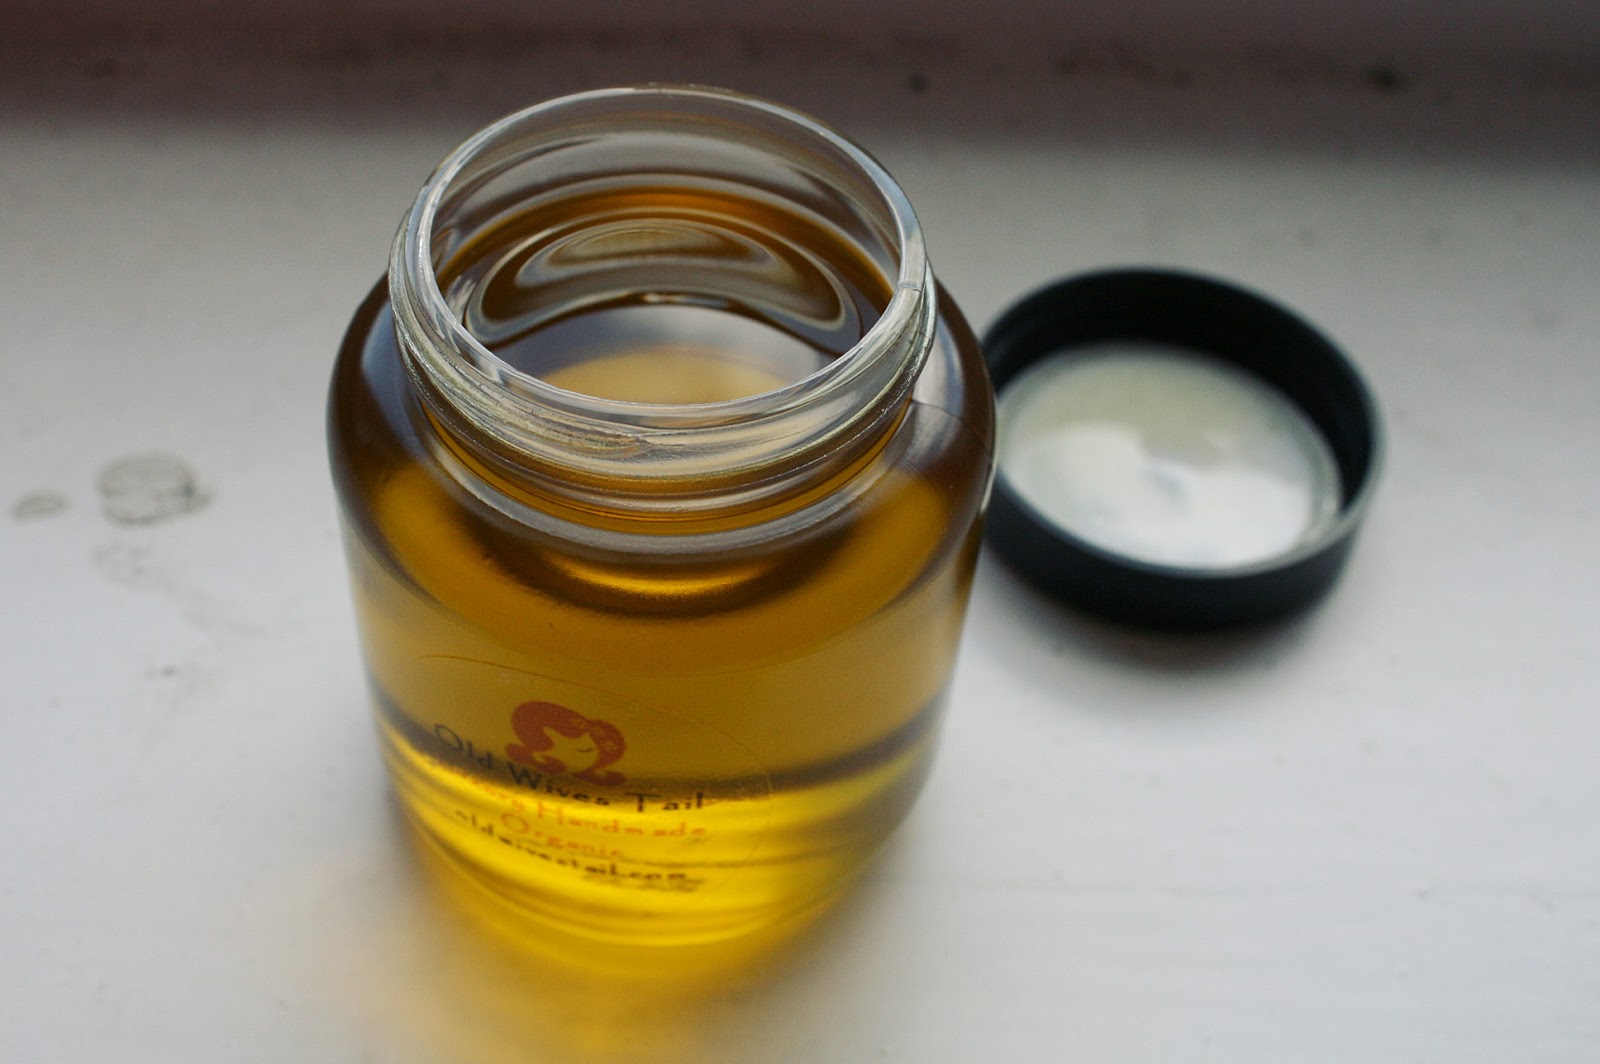 Review – Old Wives Tail Hair Growth Oil Treatment